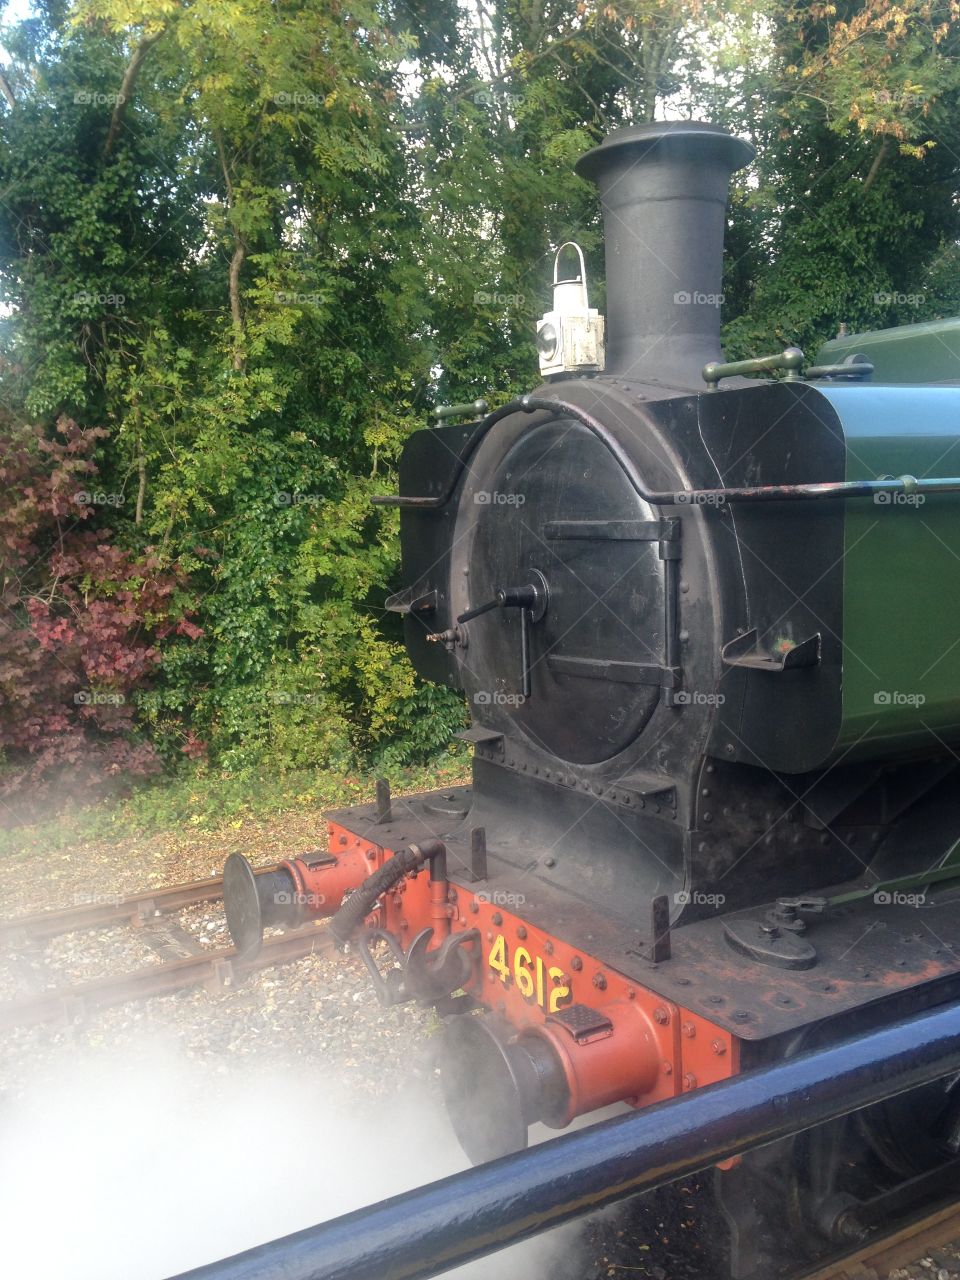 A day out on a steam train